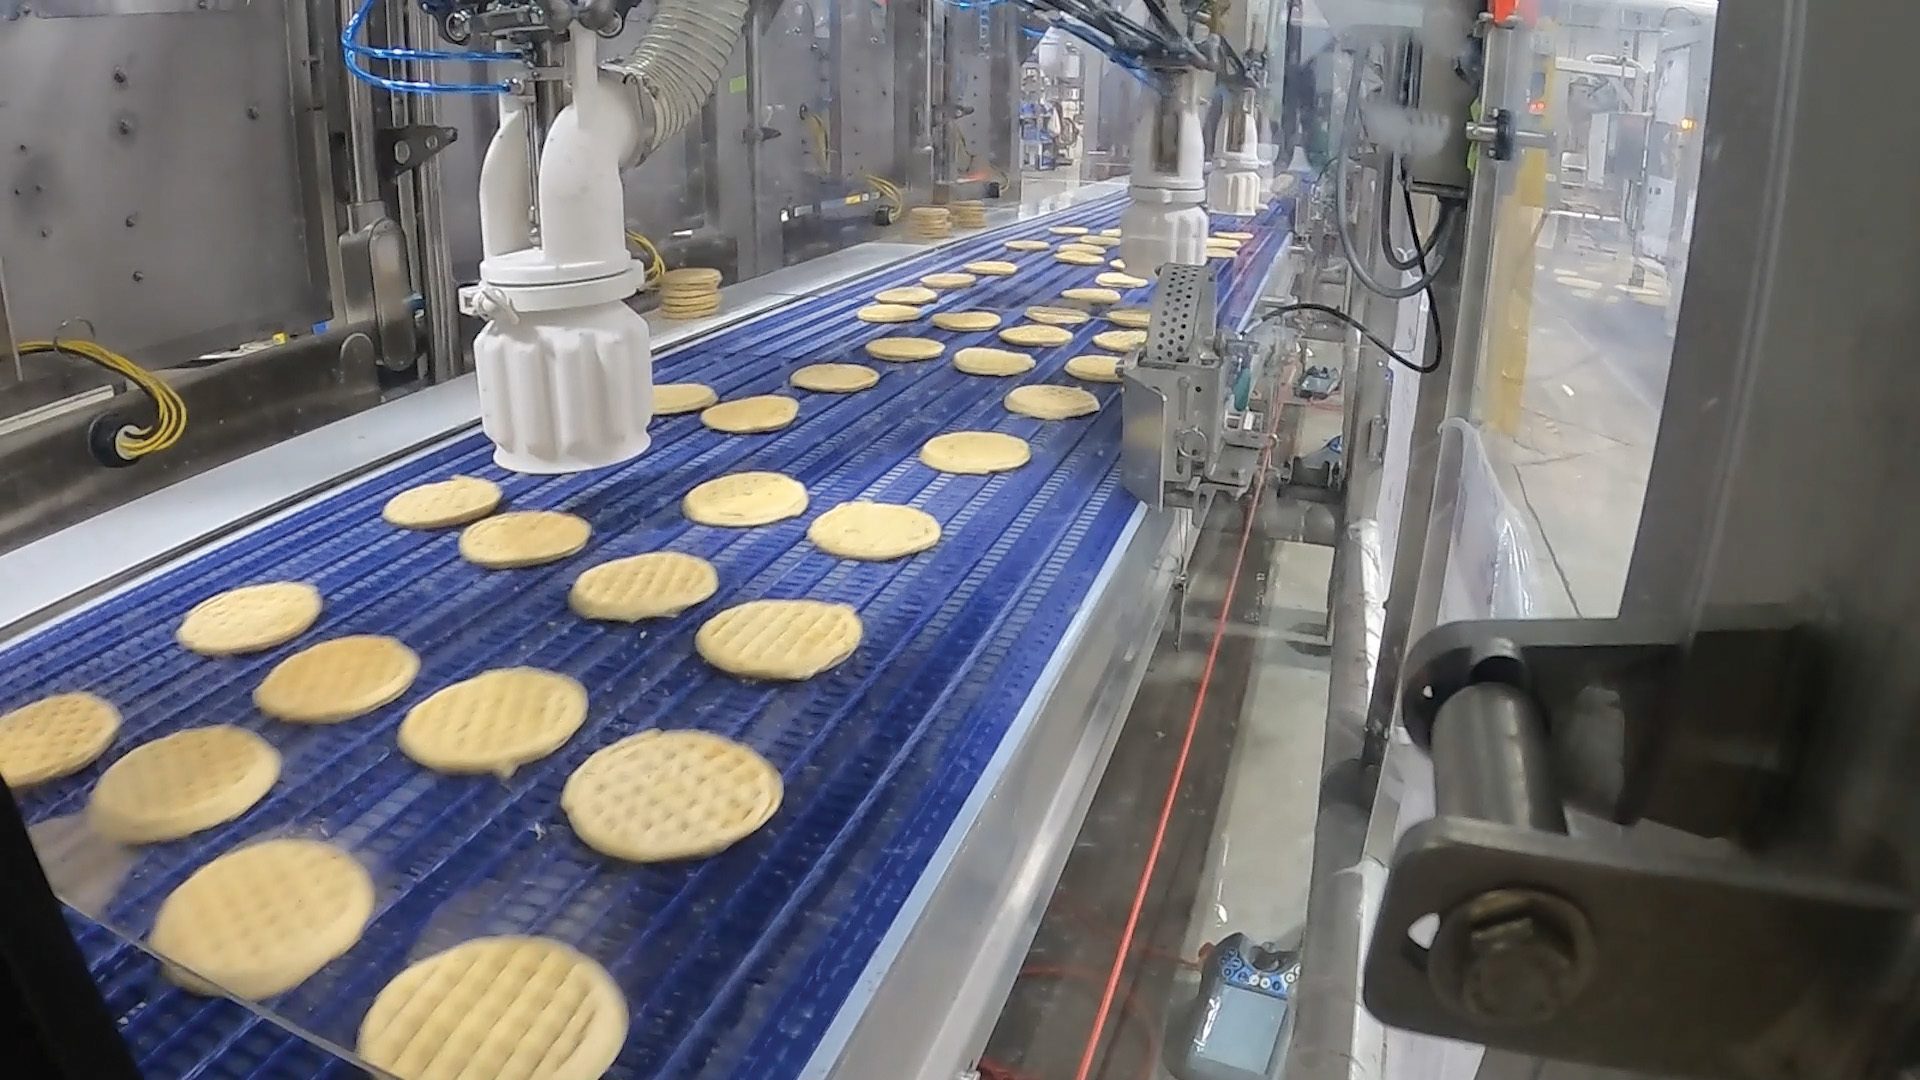 Production line, Equipment, Robotic arms, Wire, Belt, Waffles